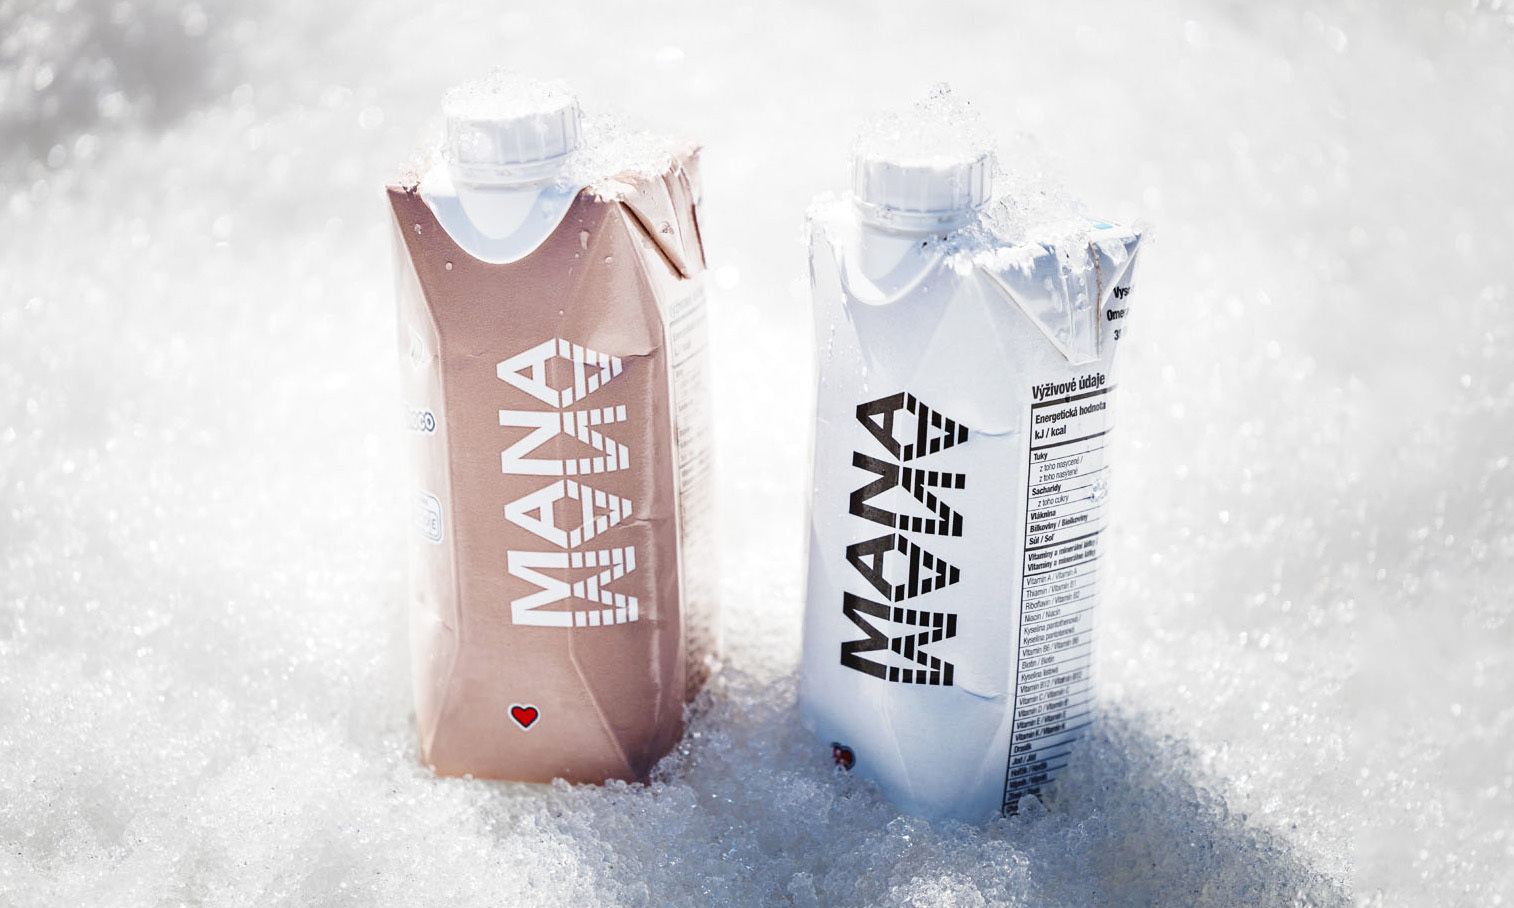 ManaDrink Choco and ManaDrink Origin on the snow for Christmas time.